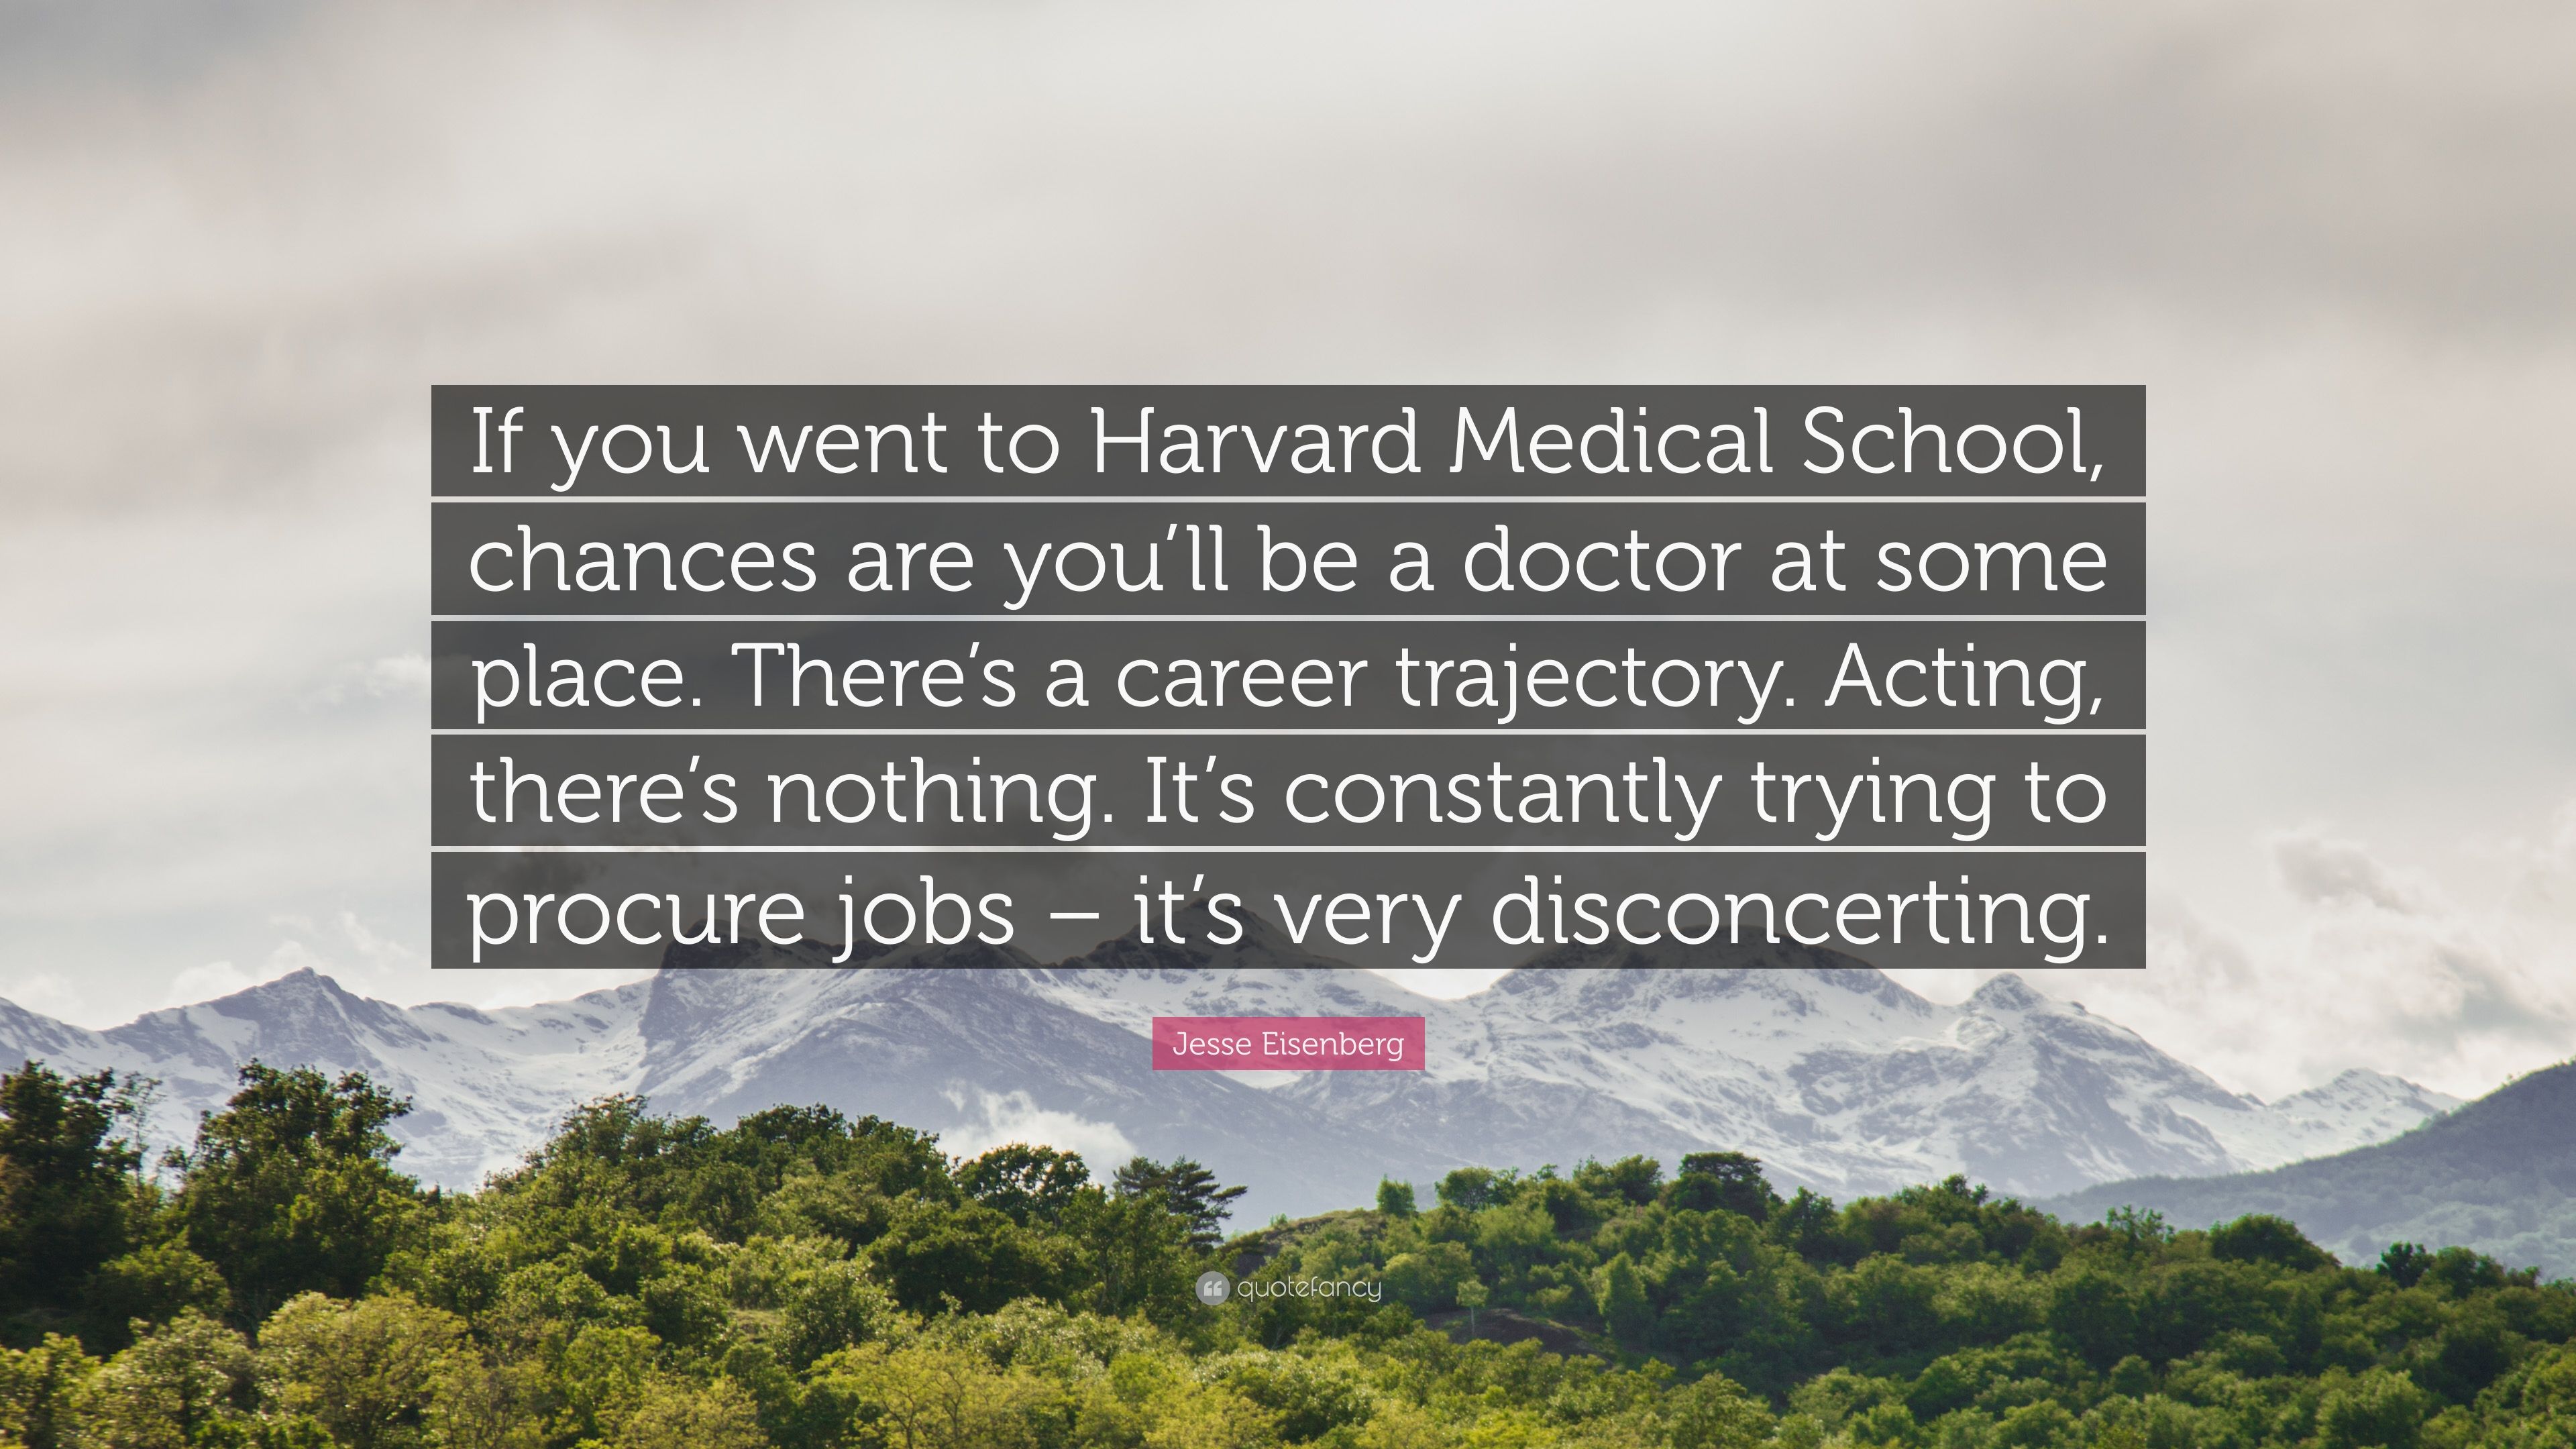 Jesse Eisenberg Quote: “If you went to Harvard Medical School, chances are you'll be a doctor at some place. There's a career trajectory. Acting.”